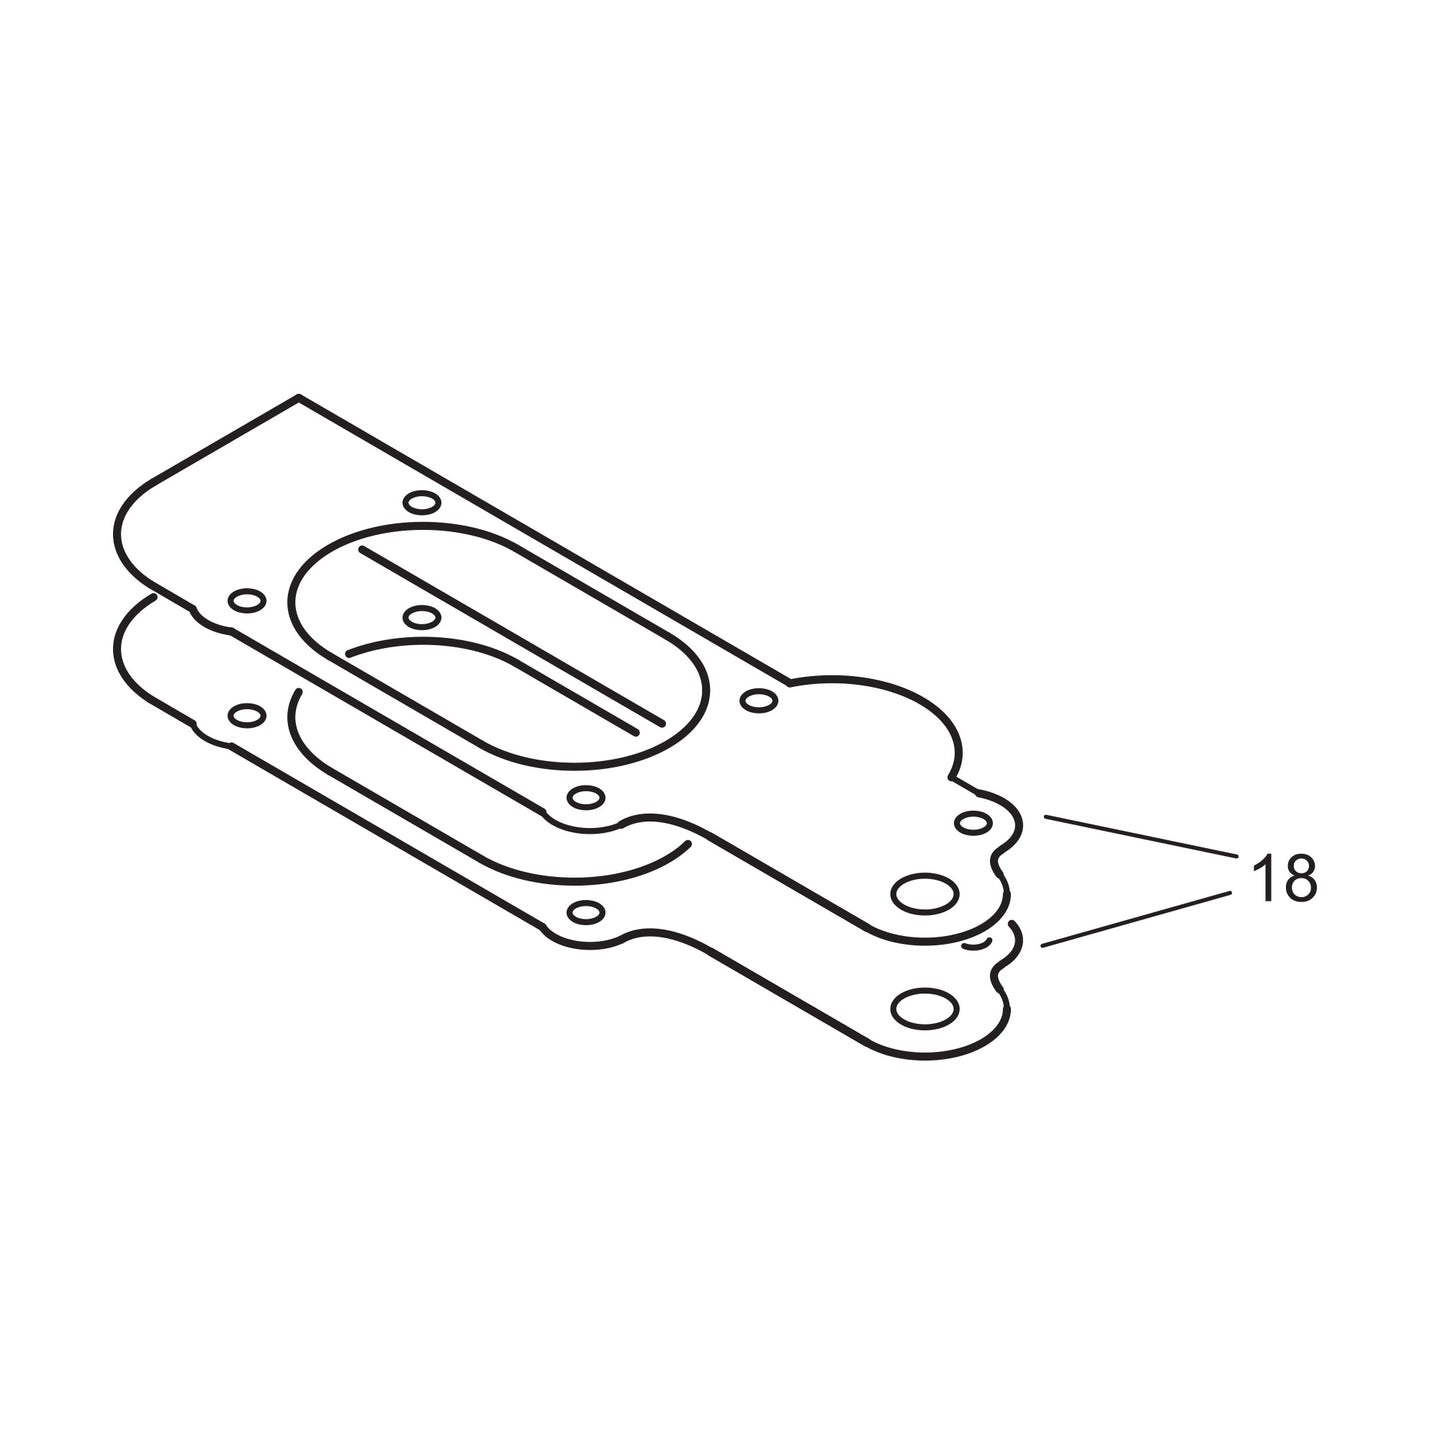 Lower Cover Gasket - .004